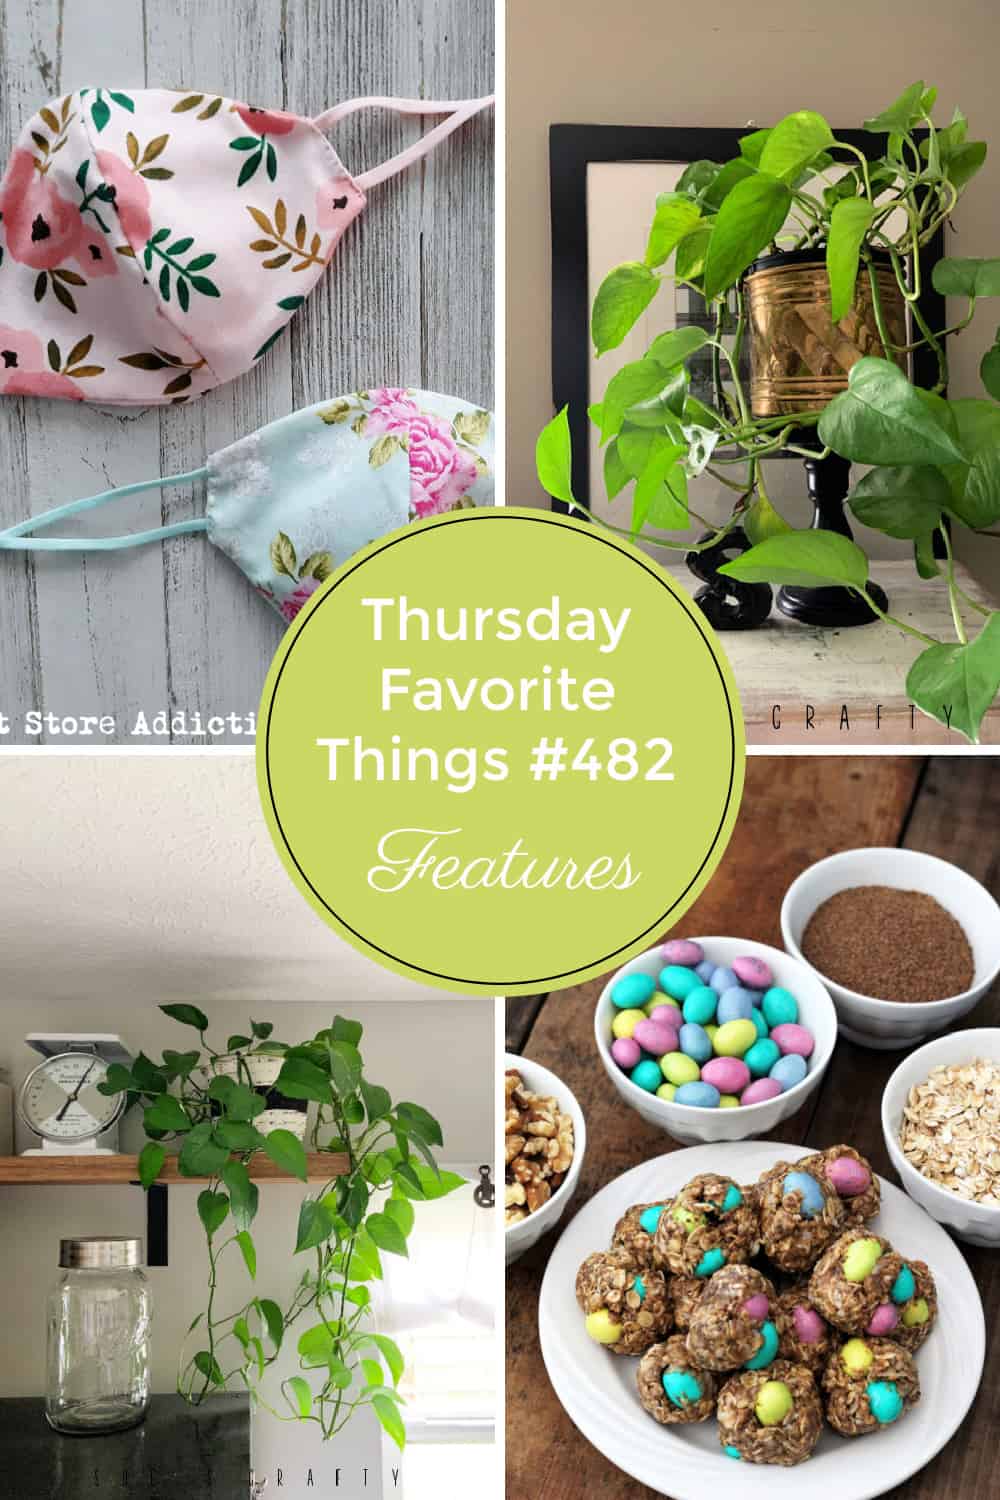 Thursday Favorite Things #482: Spring is Here